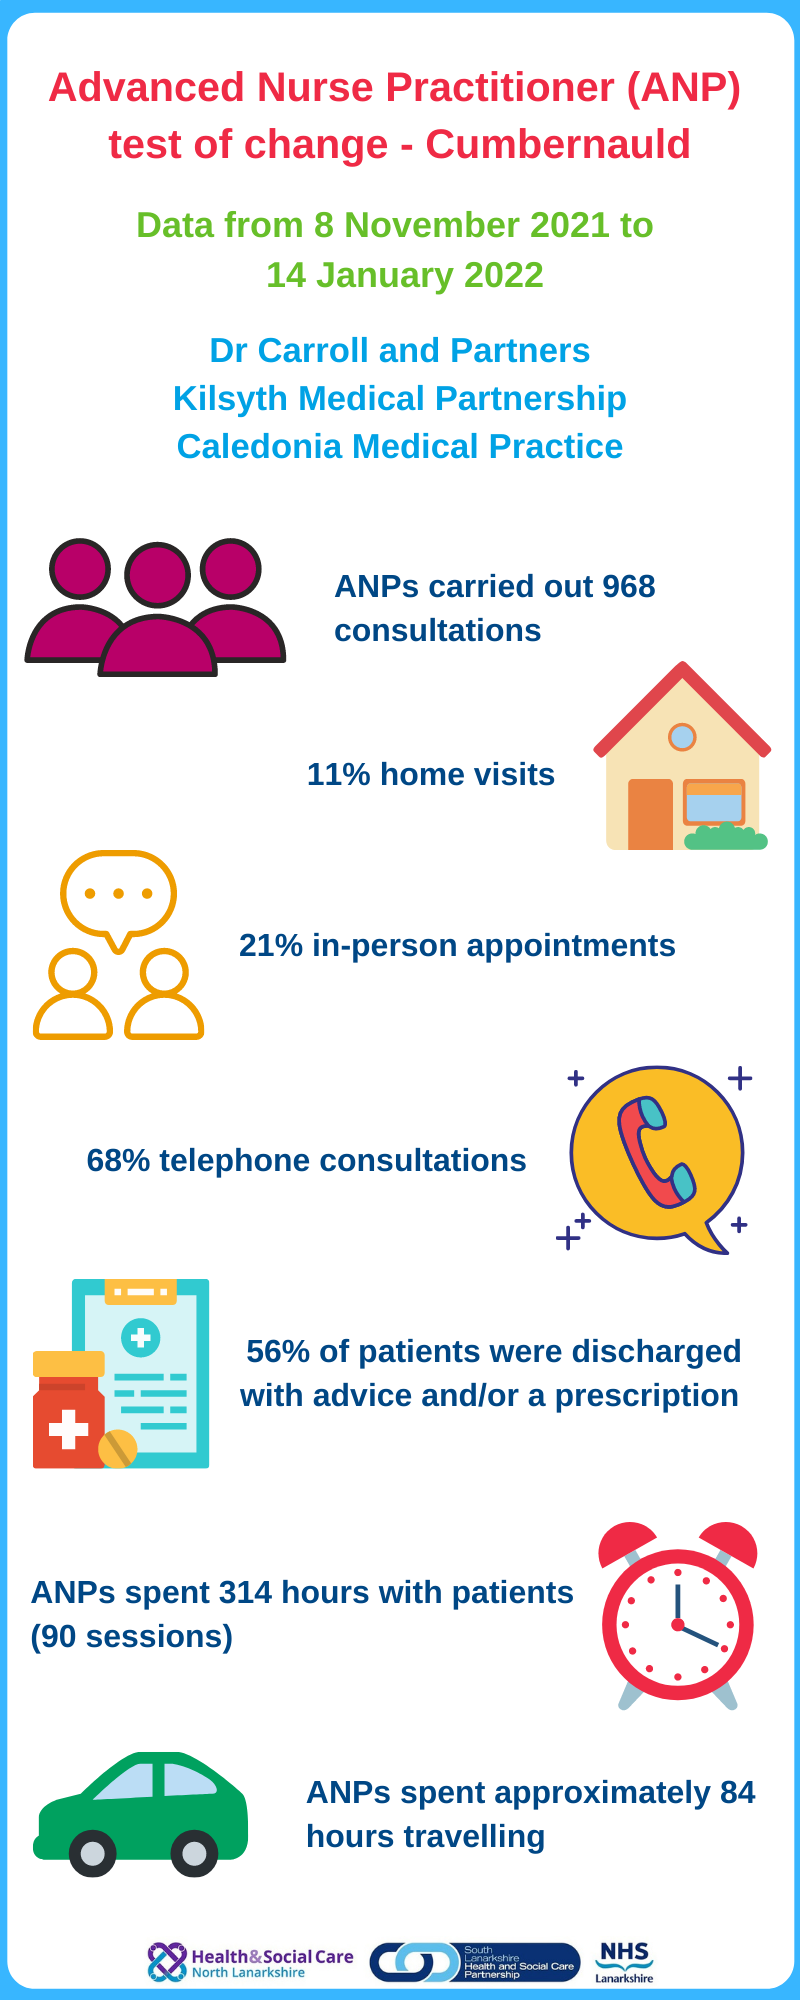 Advanced Nurse Practitioner (ANP) test of change started in Cumbernauld, Data from 8 November 2021 to 14 January 2022, Dr Carroll and Partners, Kilsyth Medical Partnership, Caledinia Medical Practice, ANPs carriend out 968 consultations, 11% home visits, 21% in-person appointments, 68% telephone consultations, 56% of patients were discharge with advice and/or a prescription, ANPs spent 314 hours with patients (90 sessions), ANPs spent approximately 84 hours travelling.